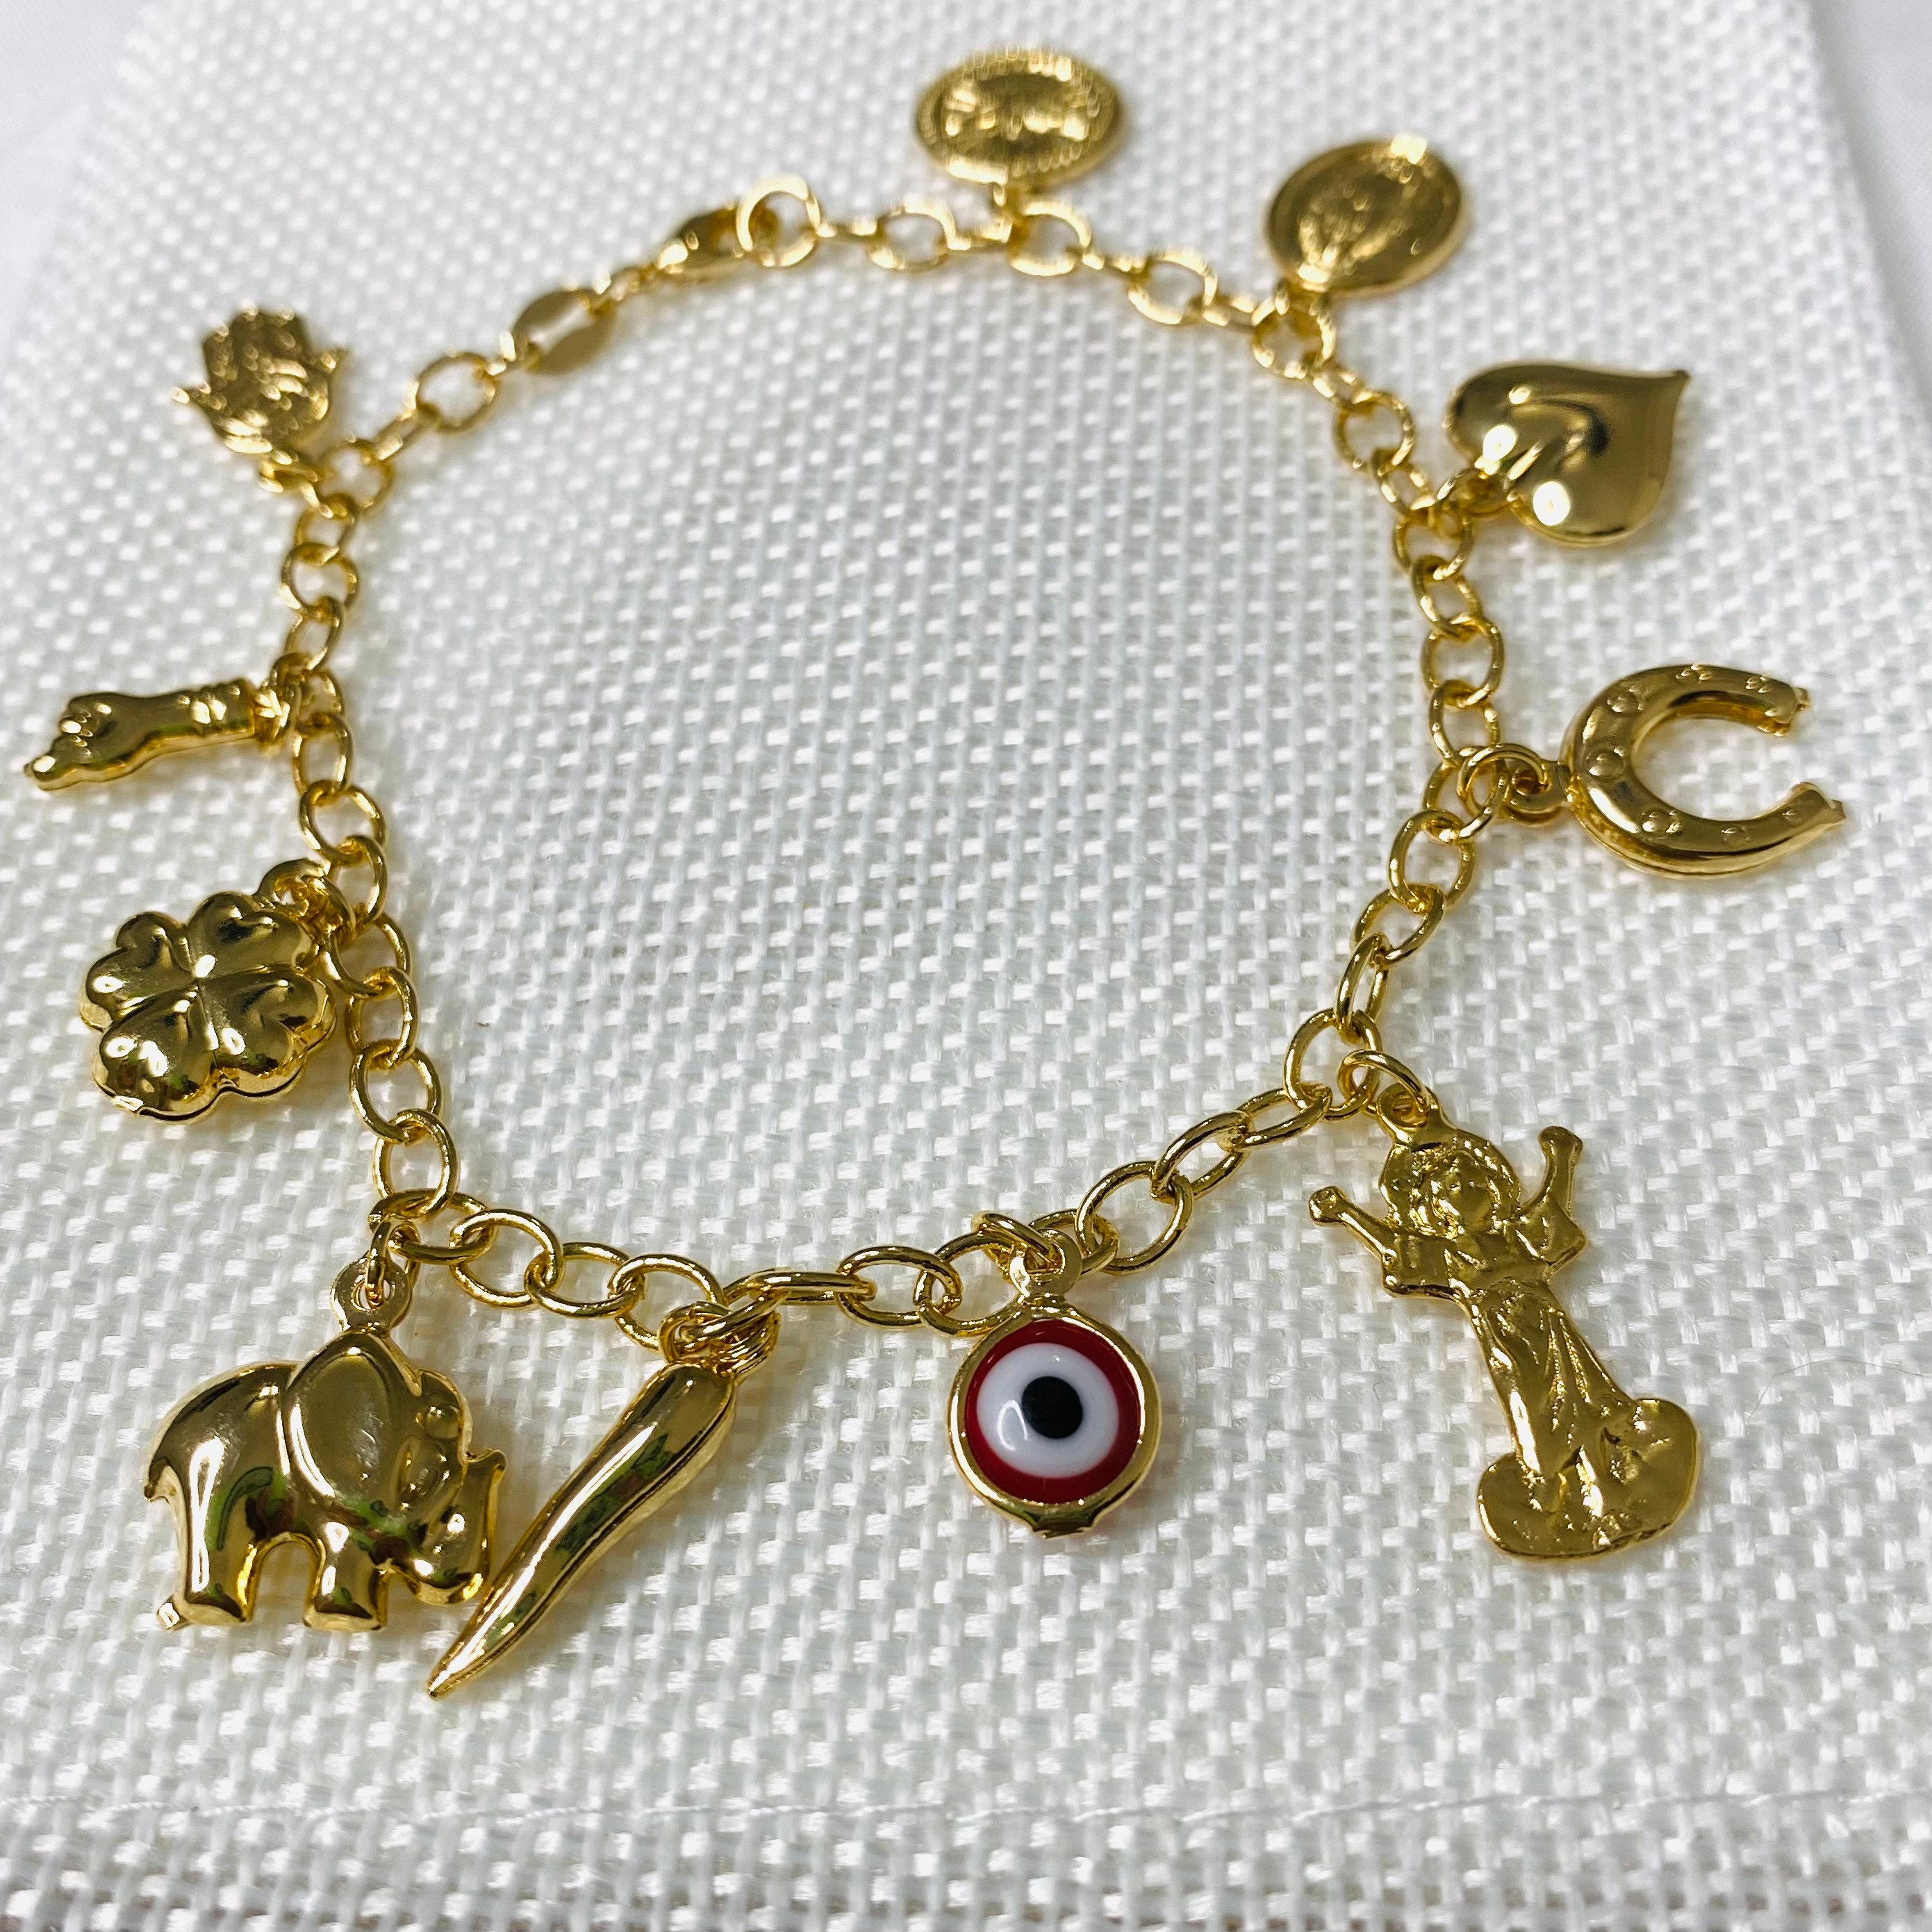 18k Gold Filled Lucky Charms Bracelet For Protection – Bella Joias Miami